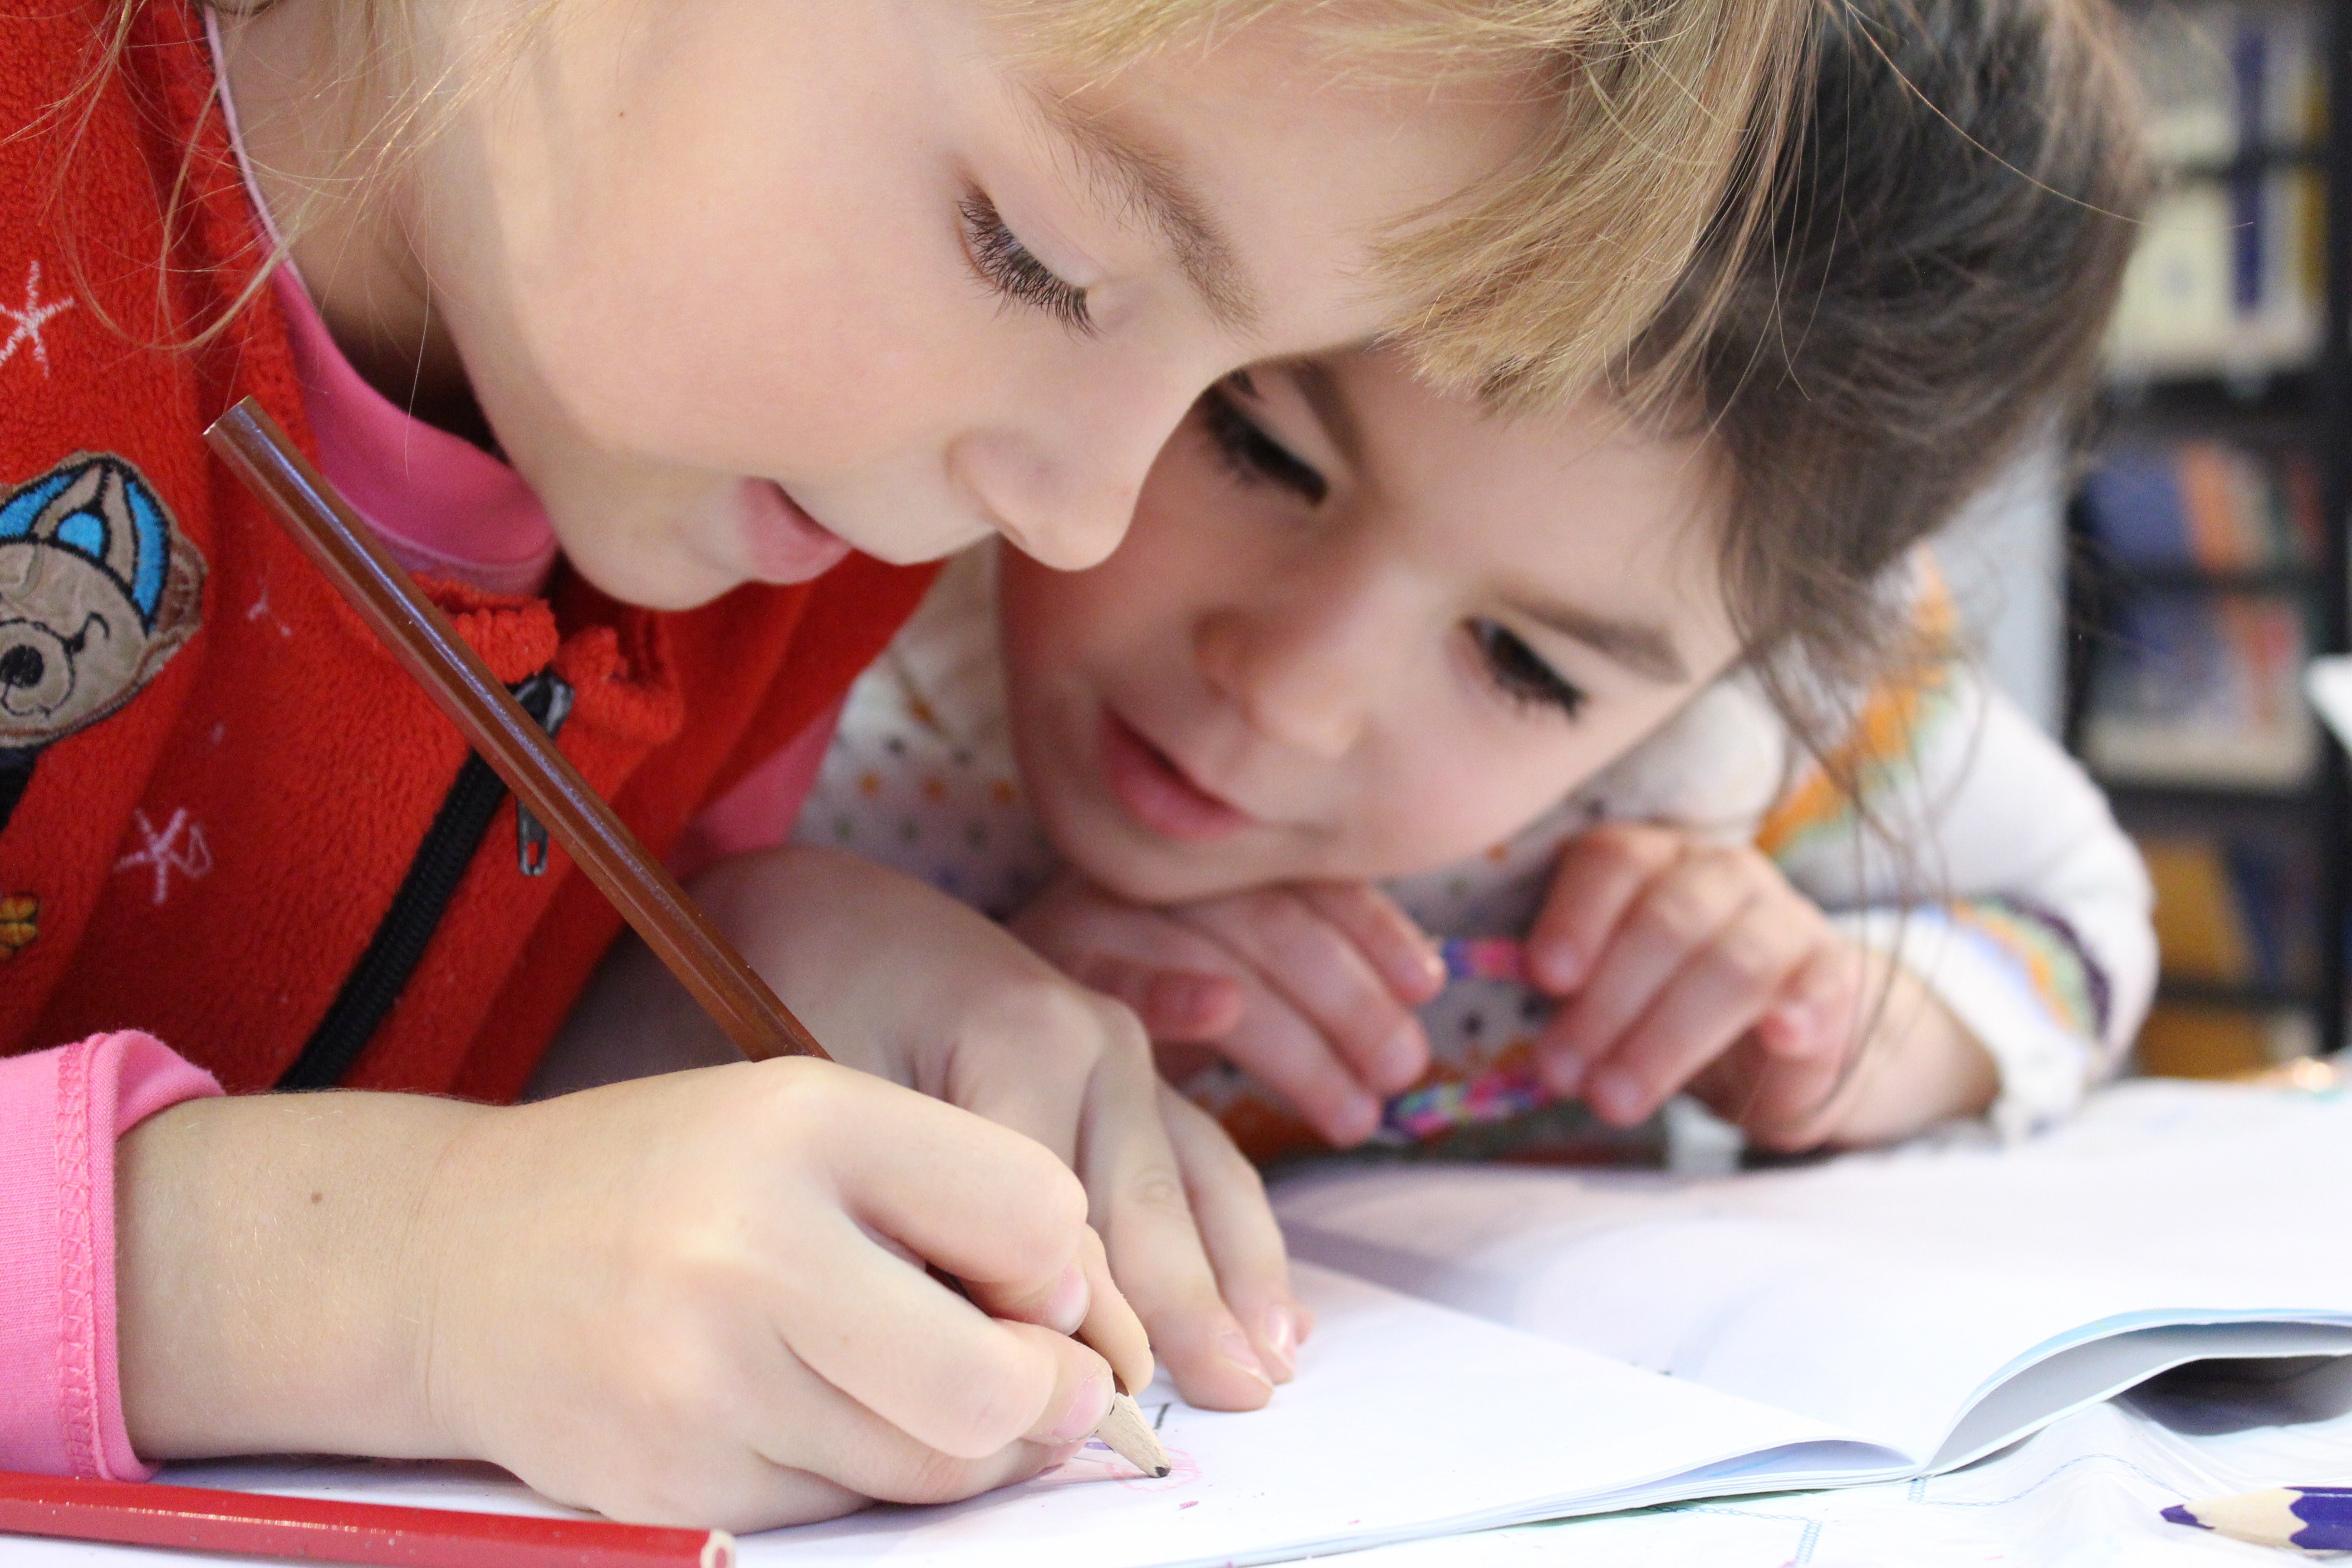 Image of two young children studying together